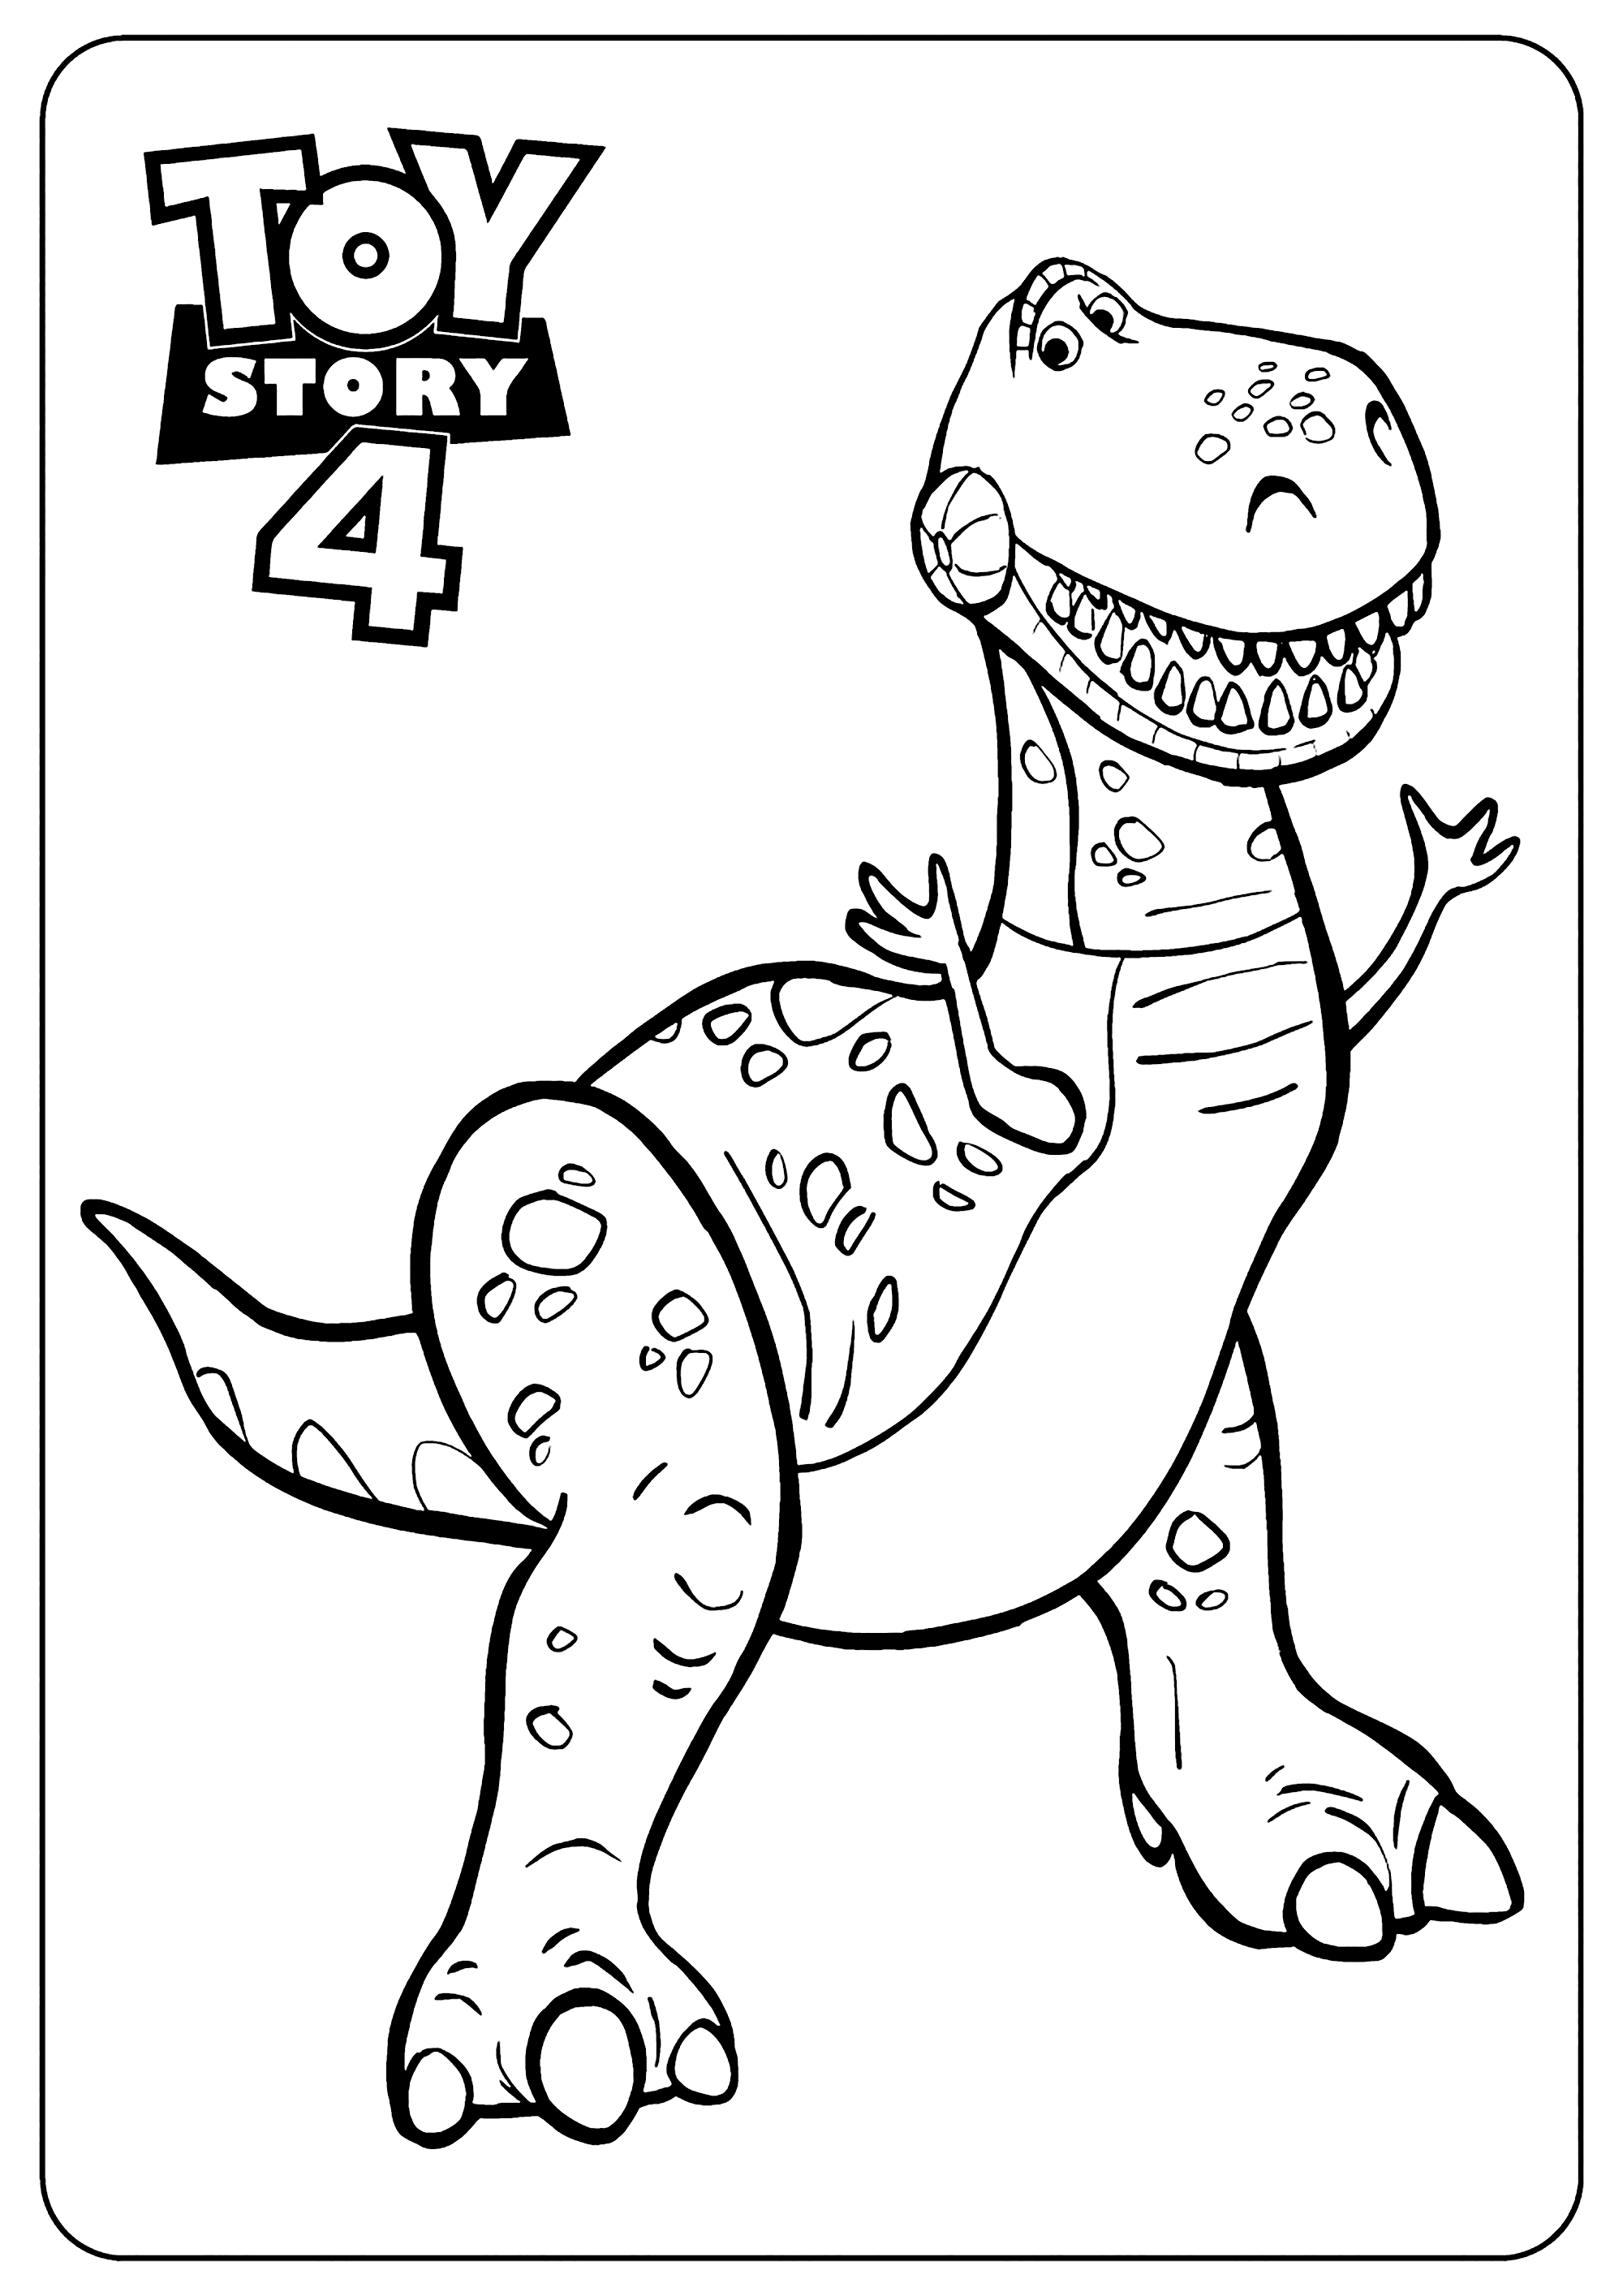 Rex cool toy story coloring pages